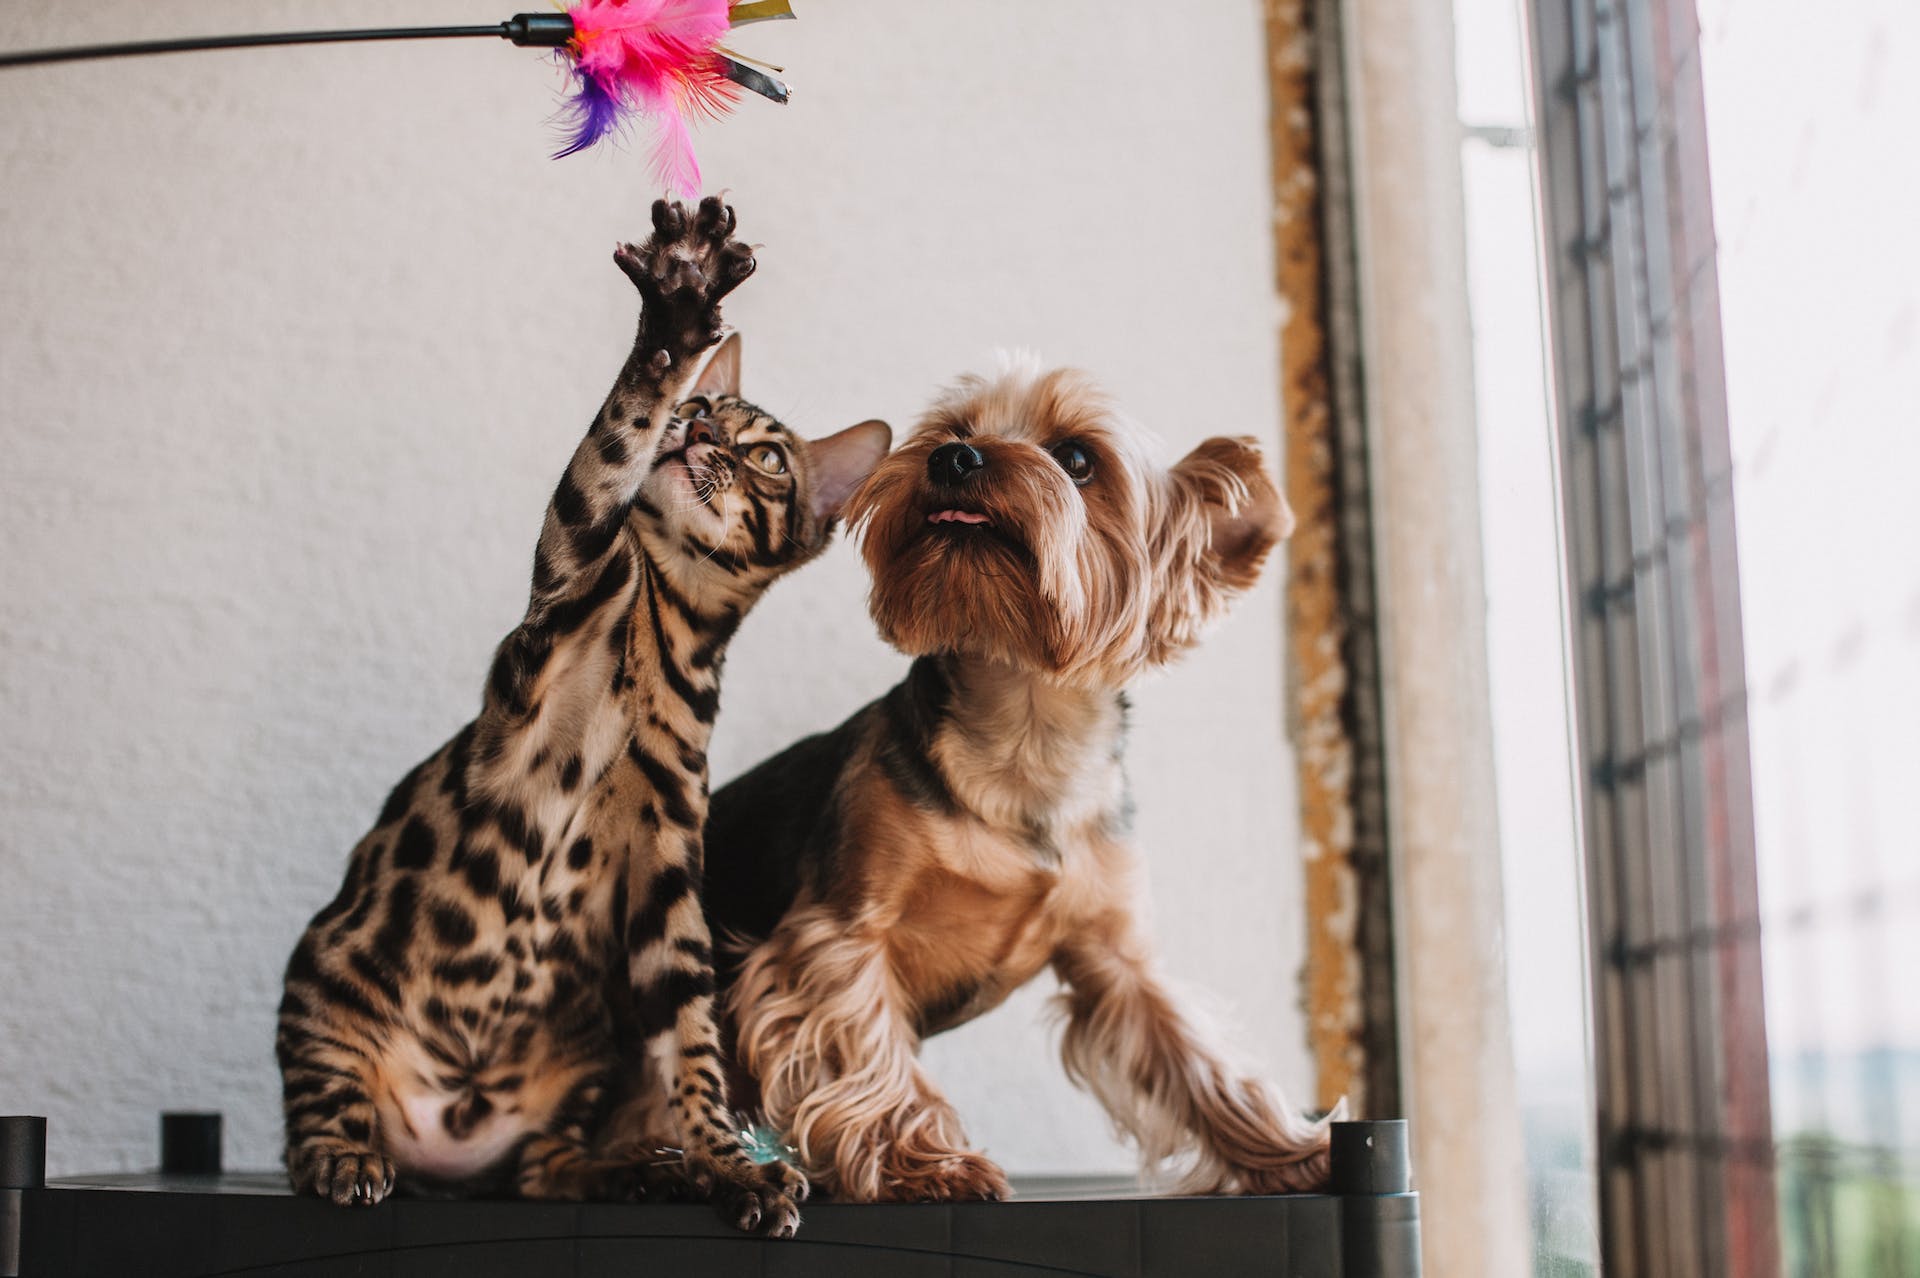 A dog and a cat playing with a feather toy indoors